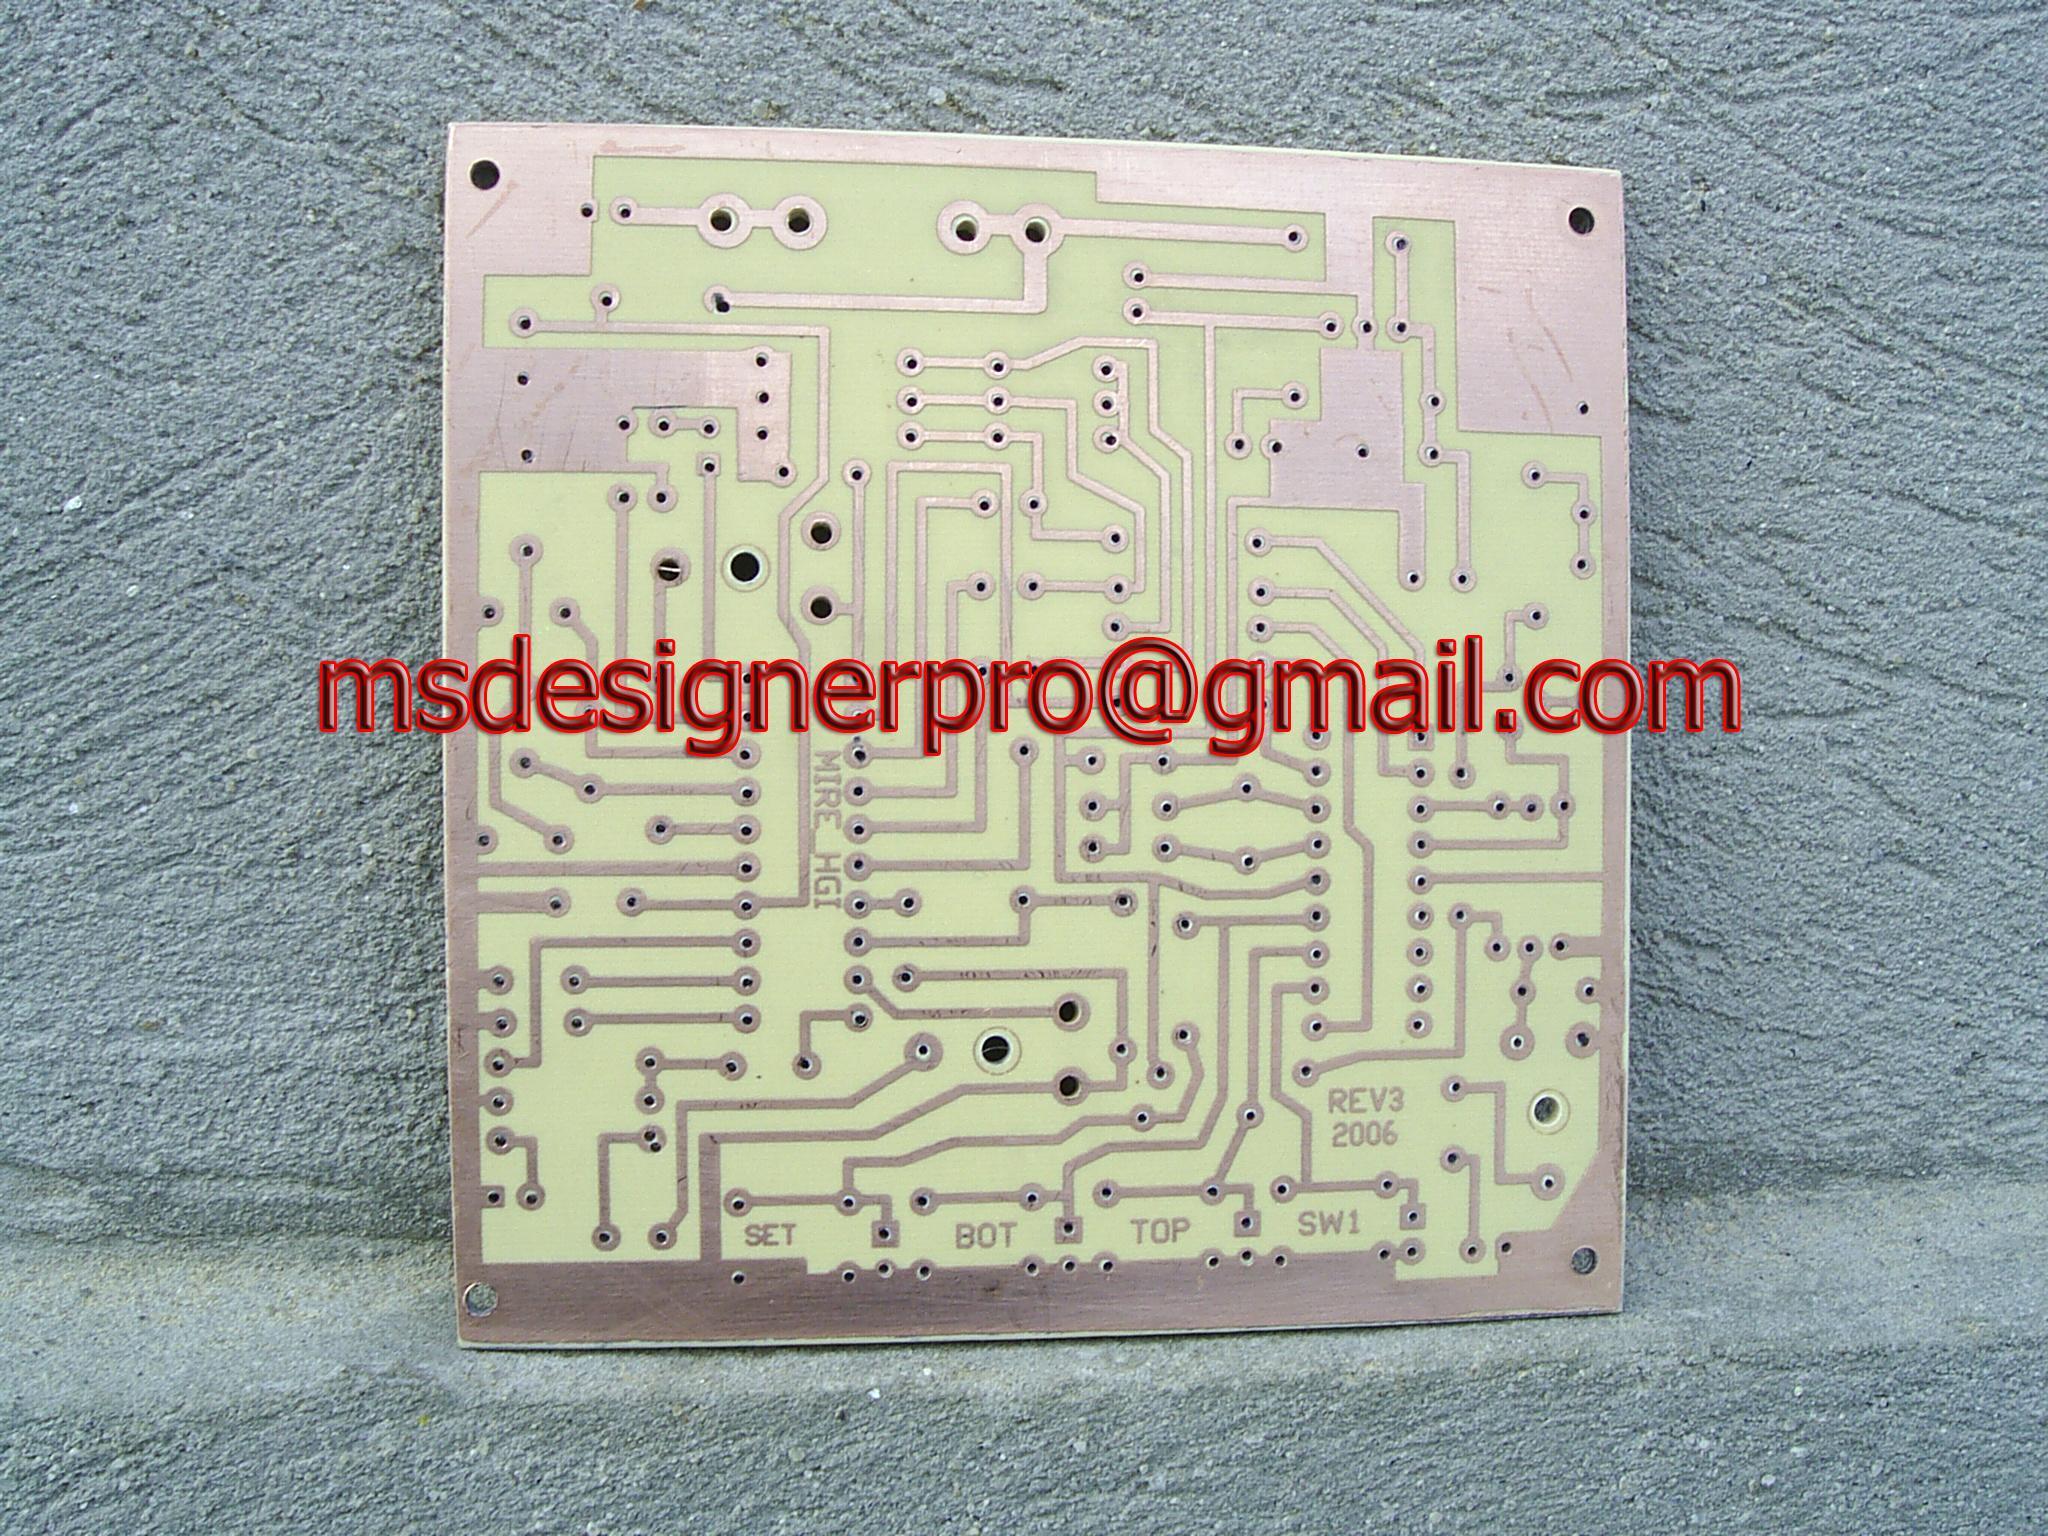 rash Go down graduate School Cheap printed circuit boards (PCB's) - home-made - Sell/Buy electronics -  Job offer/requests - Electronics-Lab.com Community